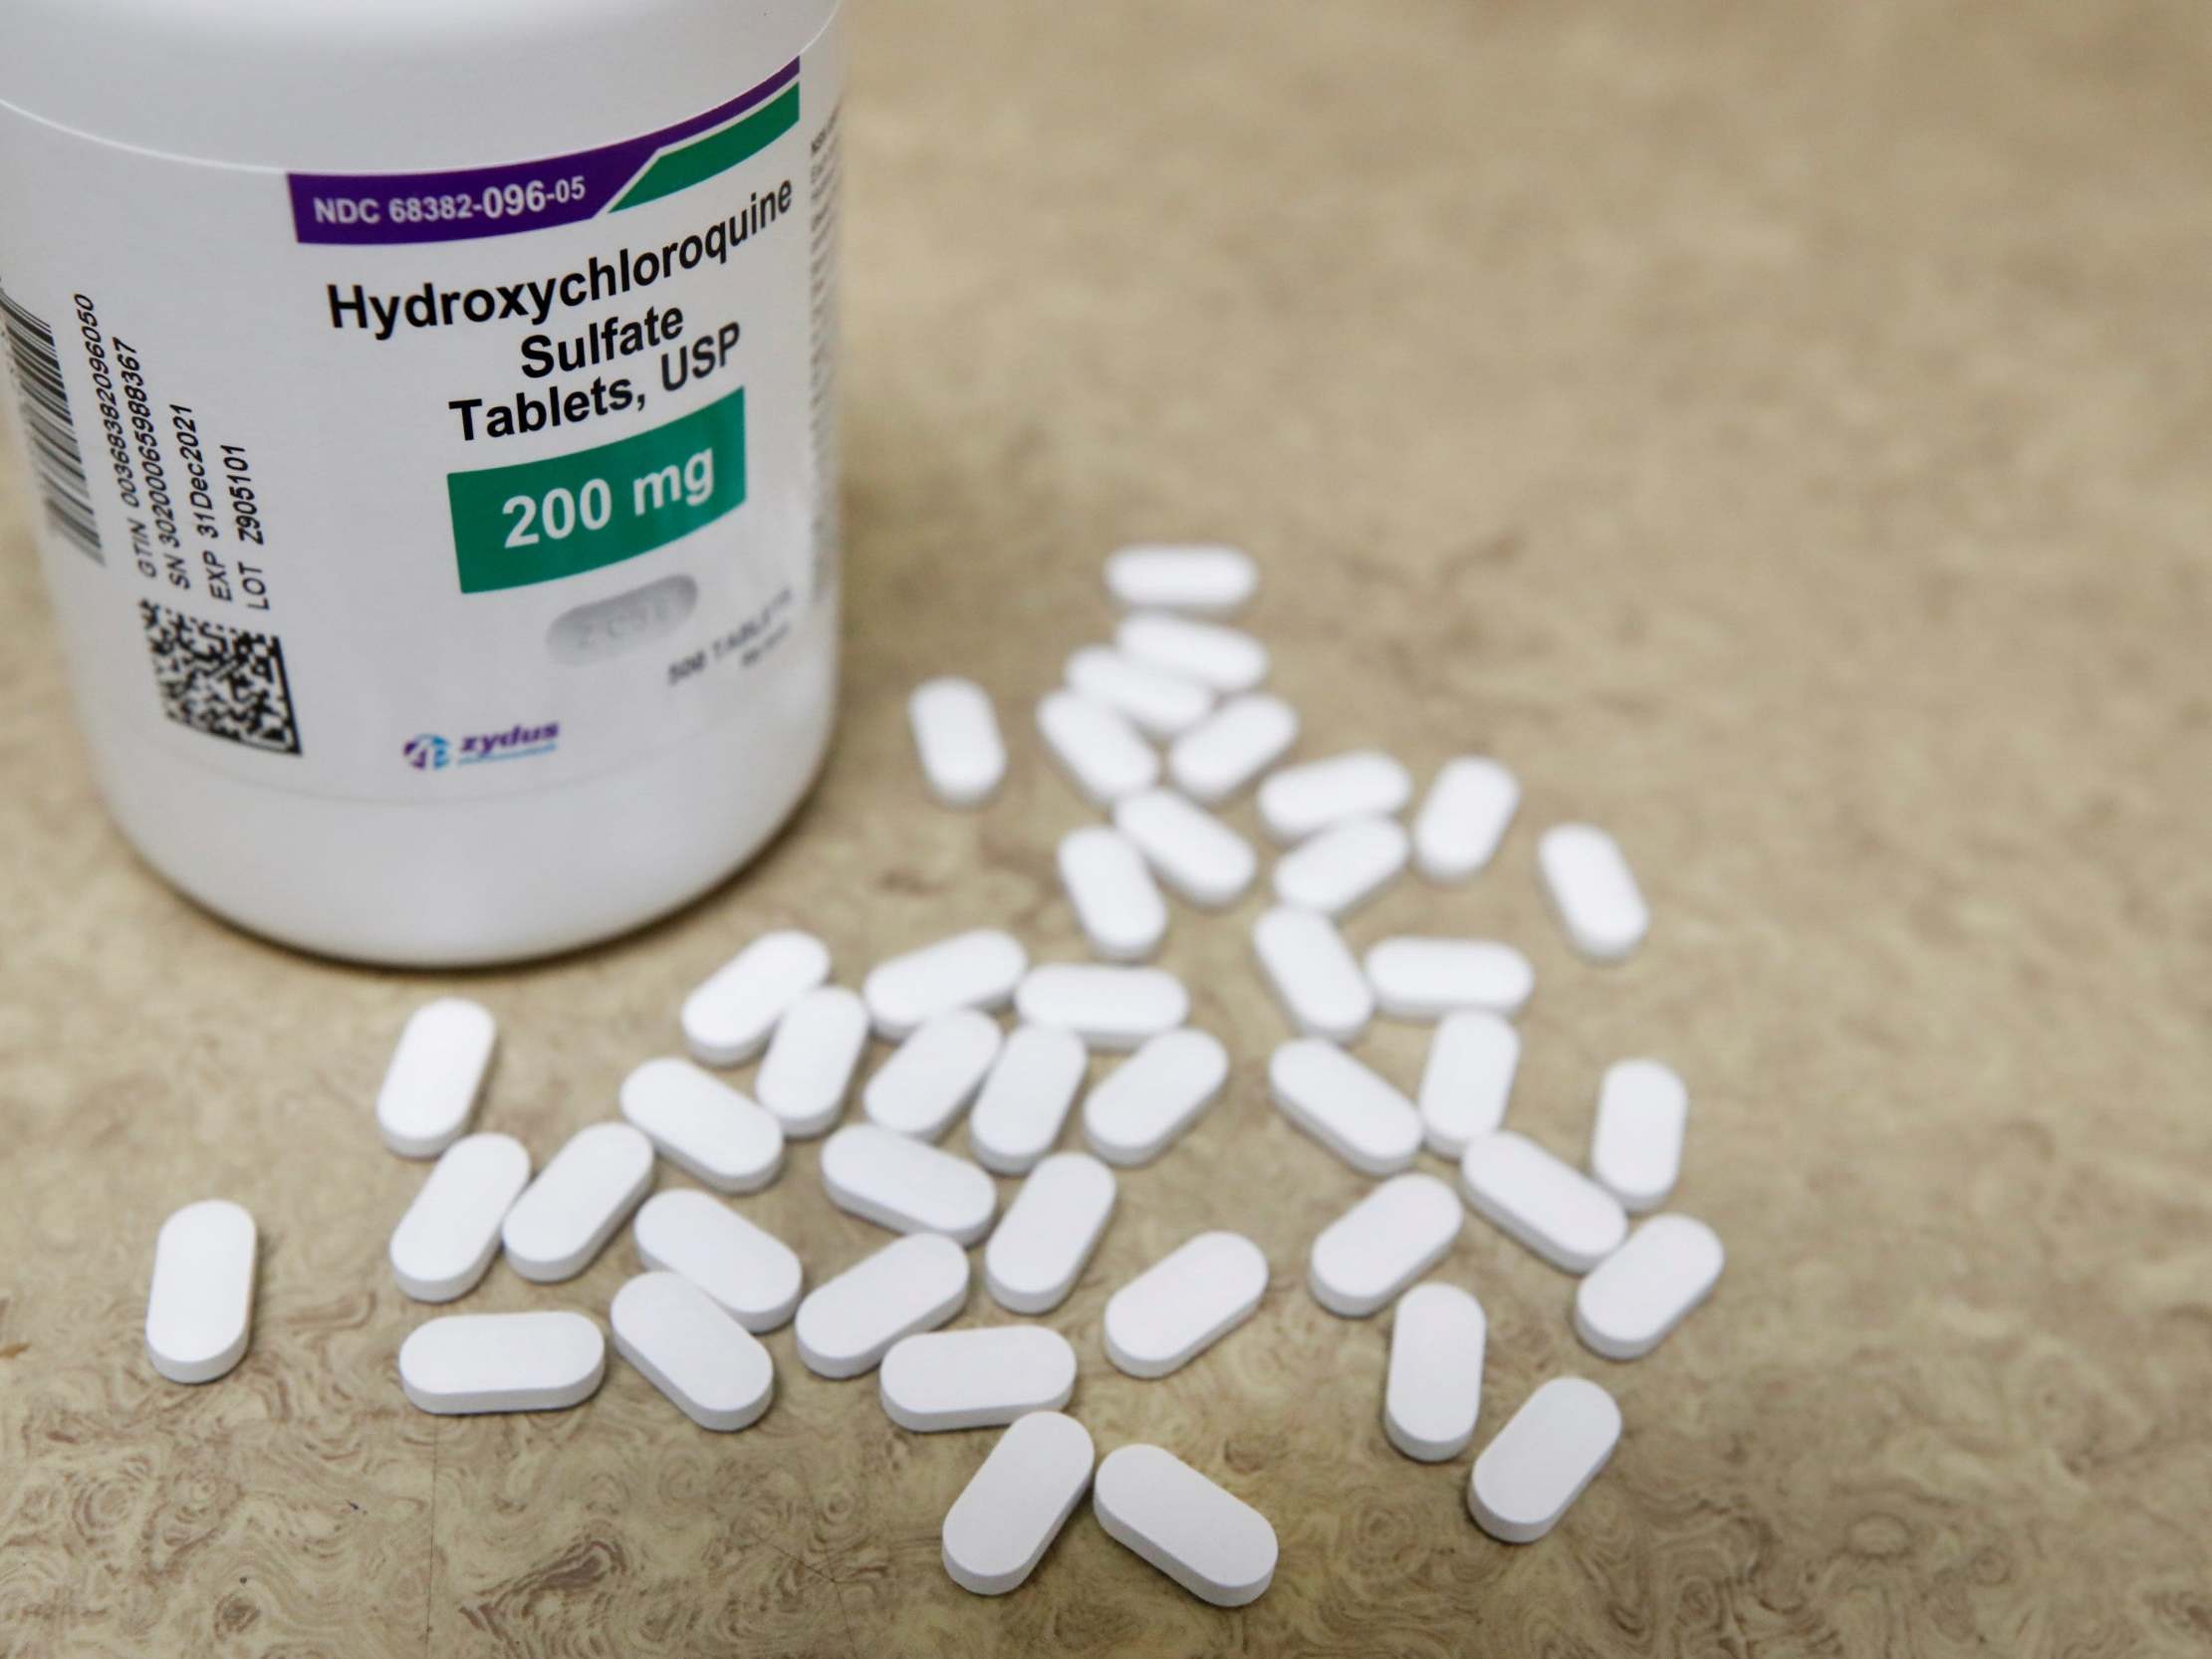 Nursing homes in two states gave hydroxychloroquine to residents with Covid without approval